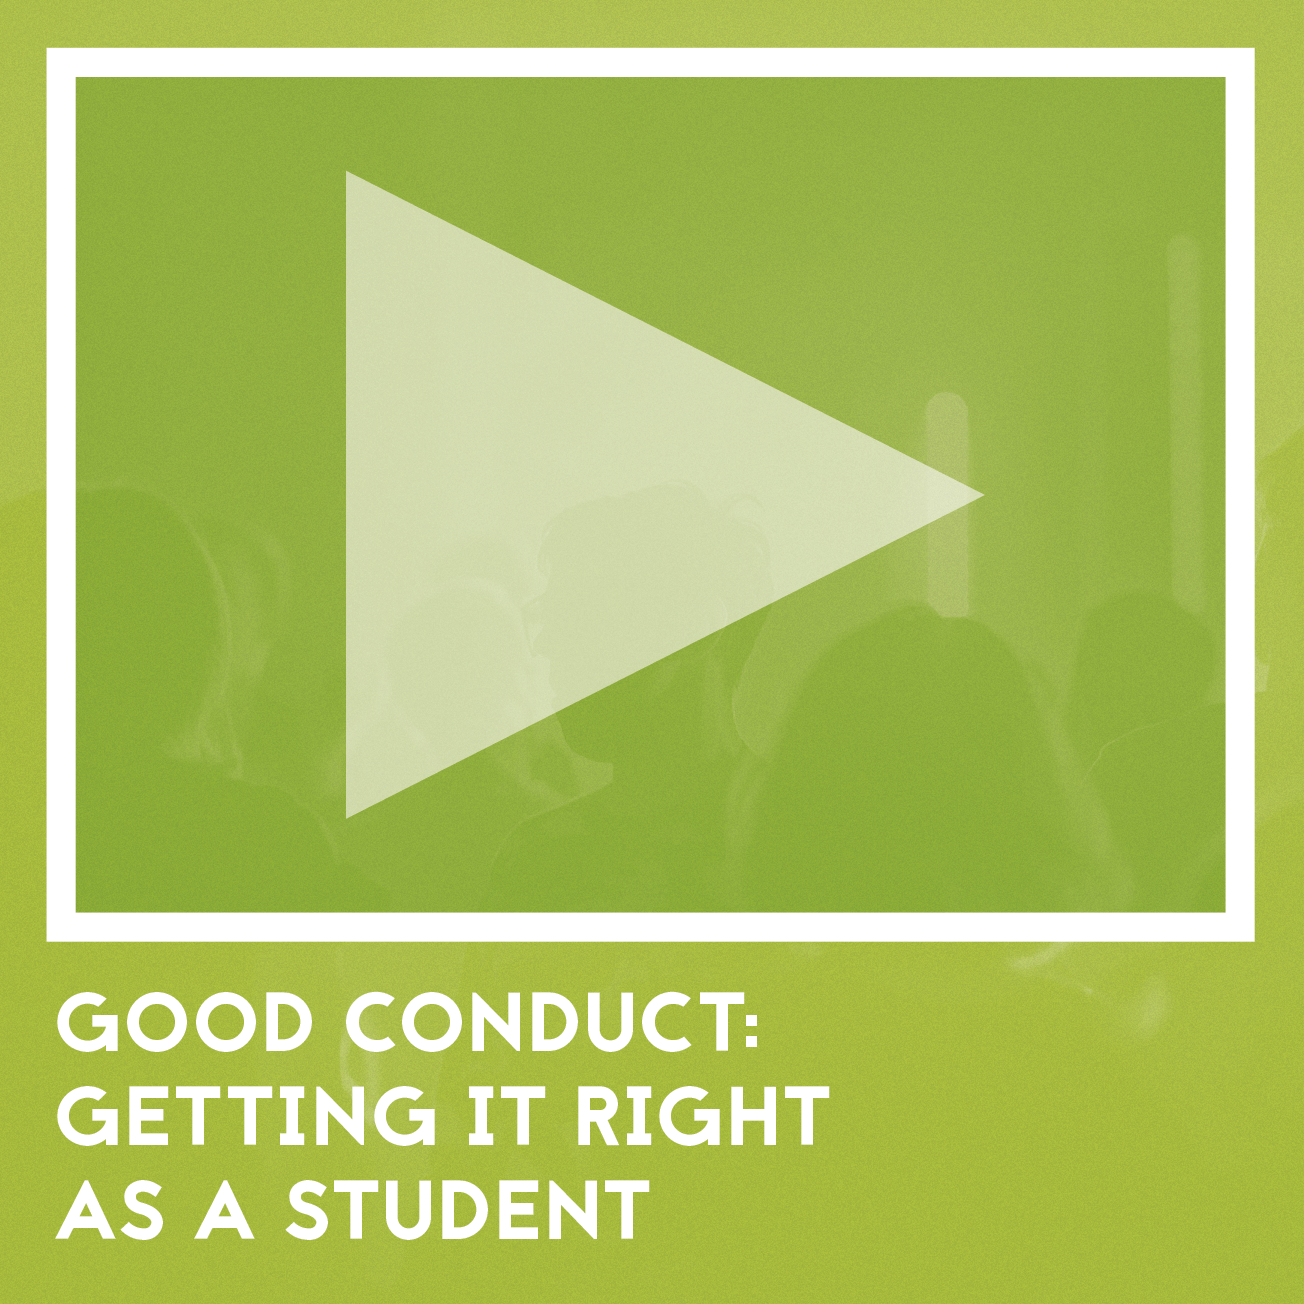 Good conduct getting it right as a student